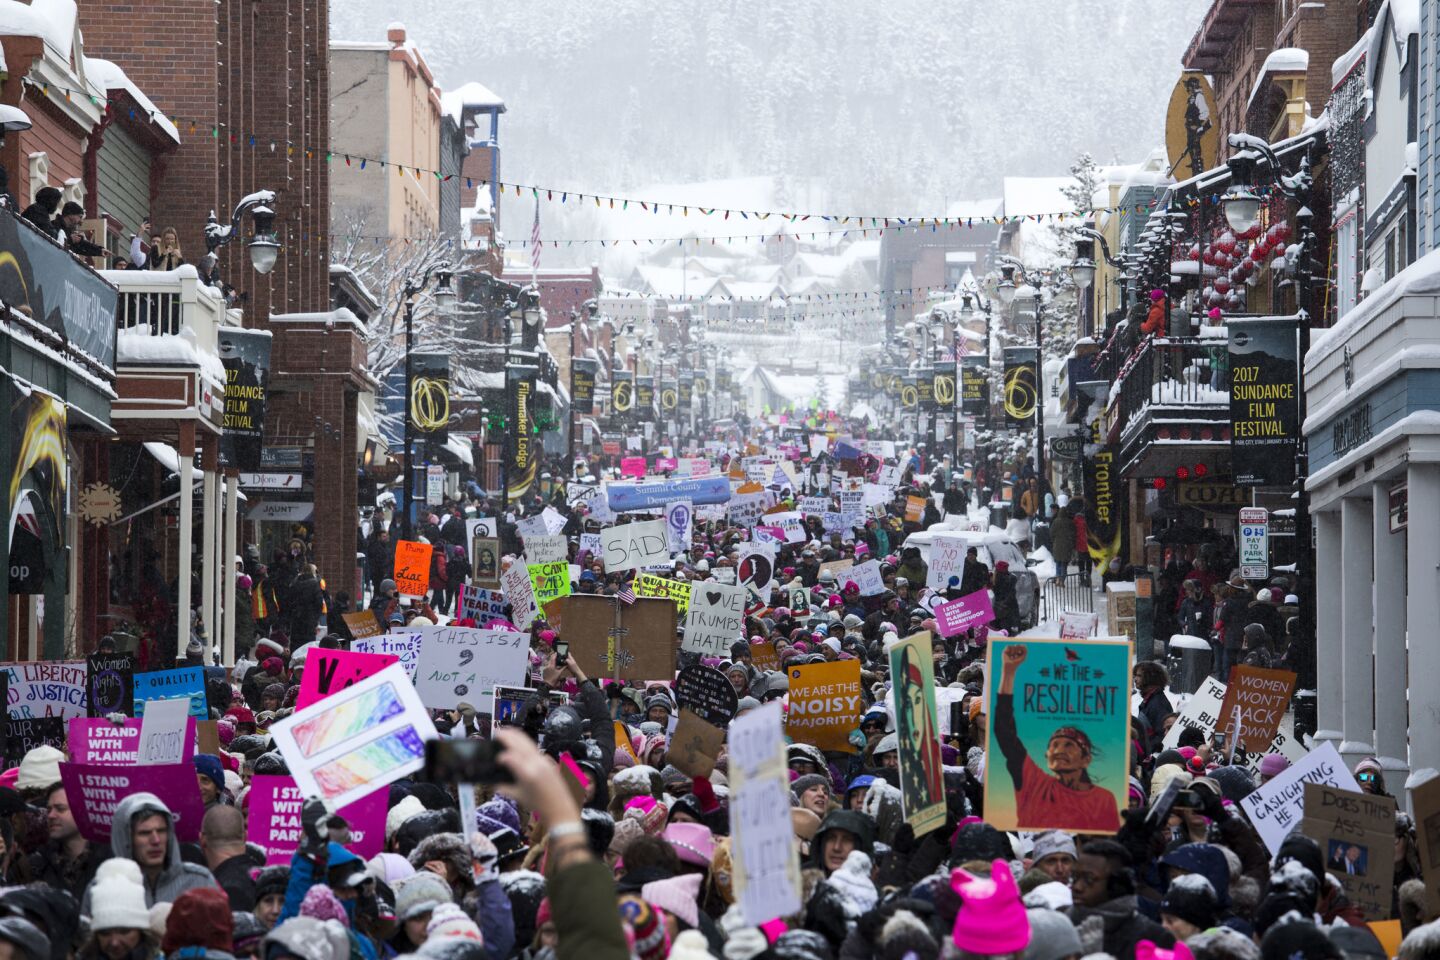 People march down Main Street during the March on Main event during the Sundance Film Festival.